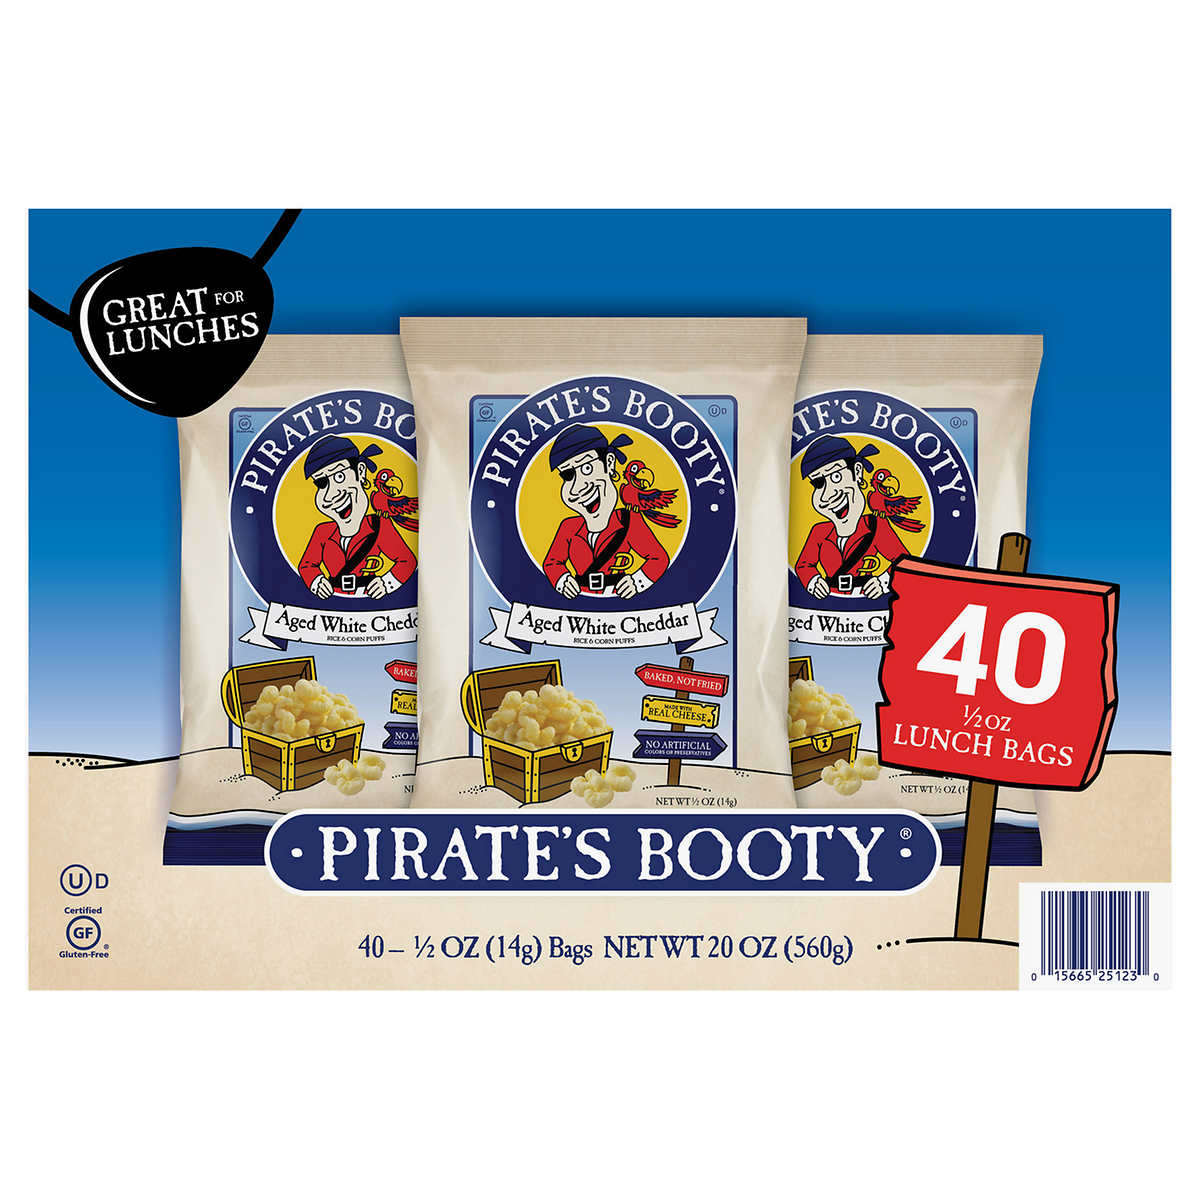 Pirate’s Booty Aged White Cheddar Snack, 0.5 oz, 40-count